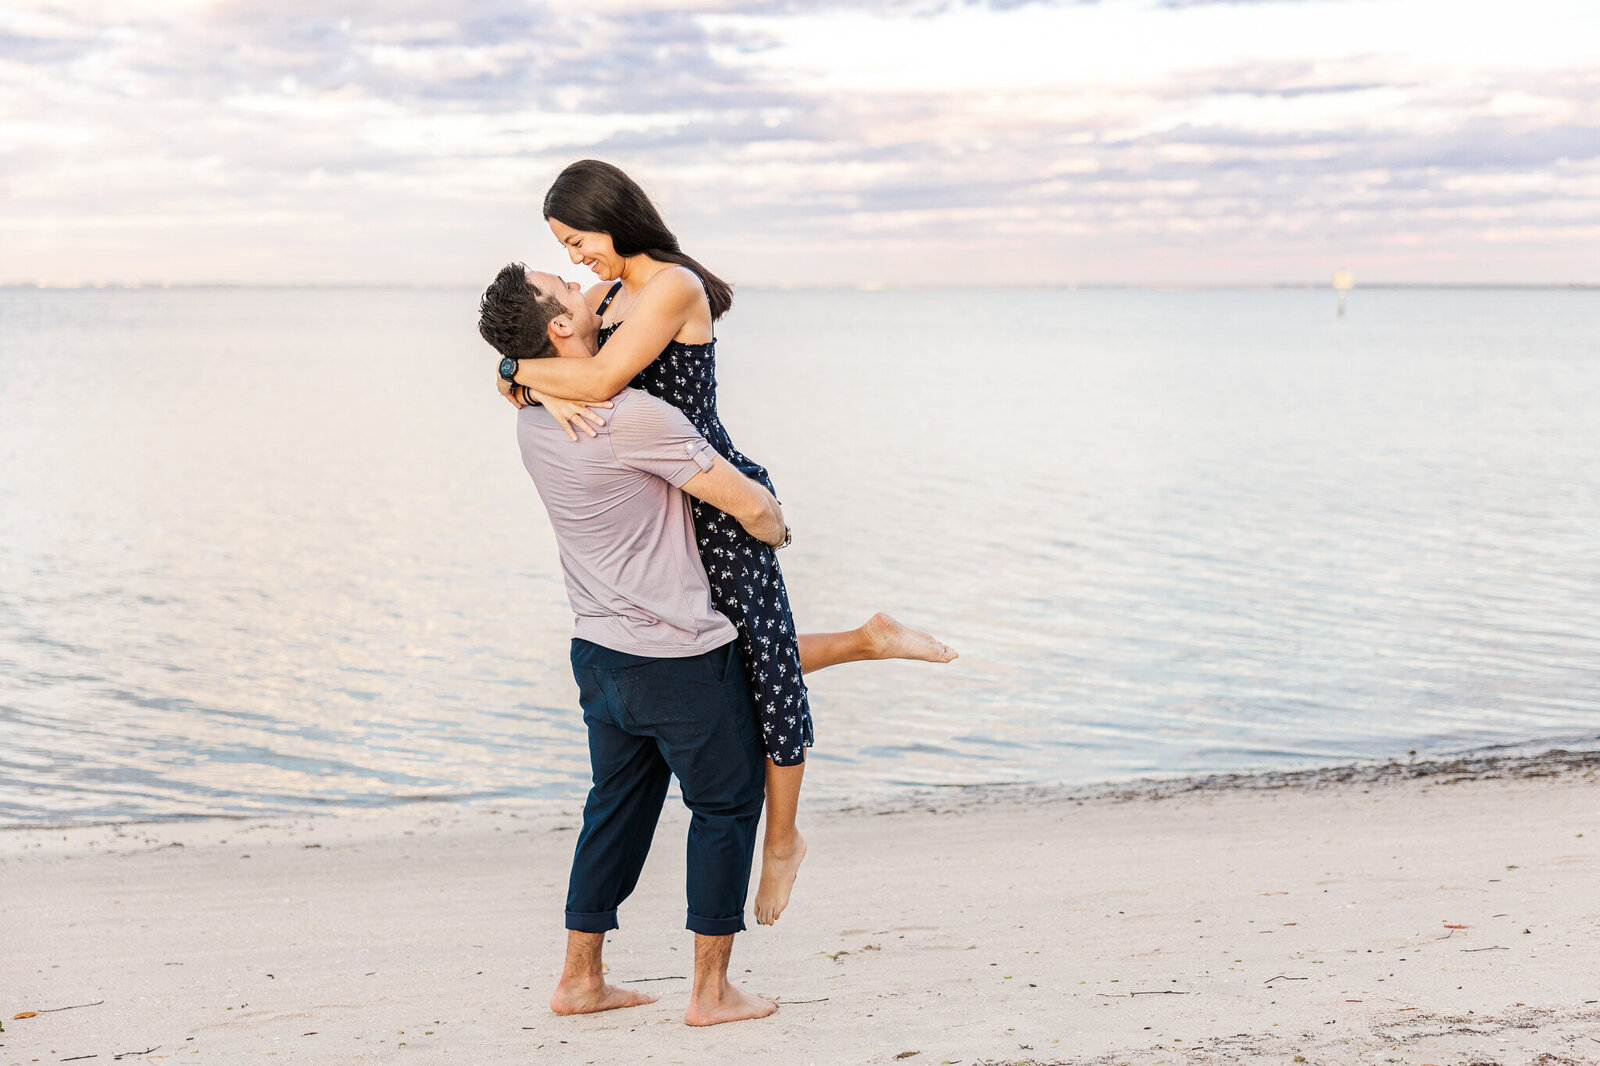 A husband lifts his wife in the air as they stand on a beach with the ocean in background